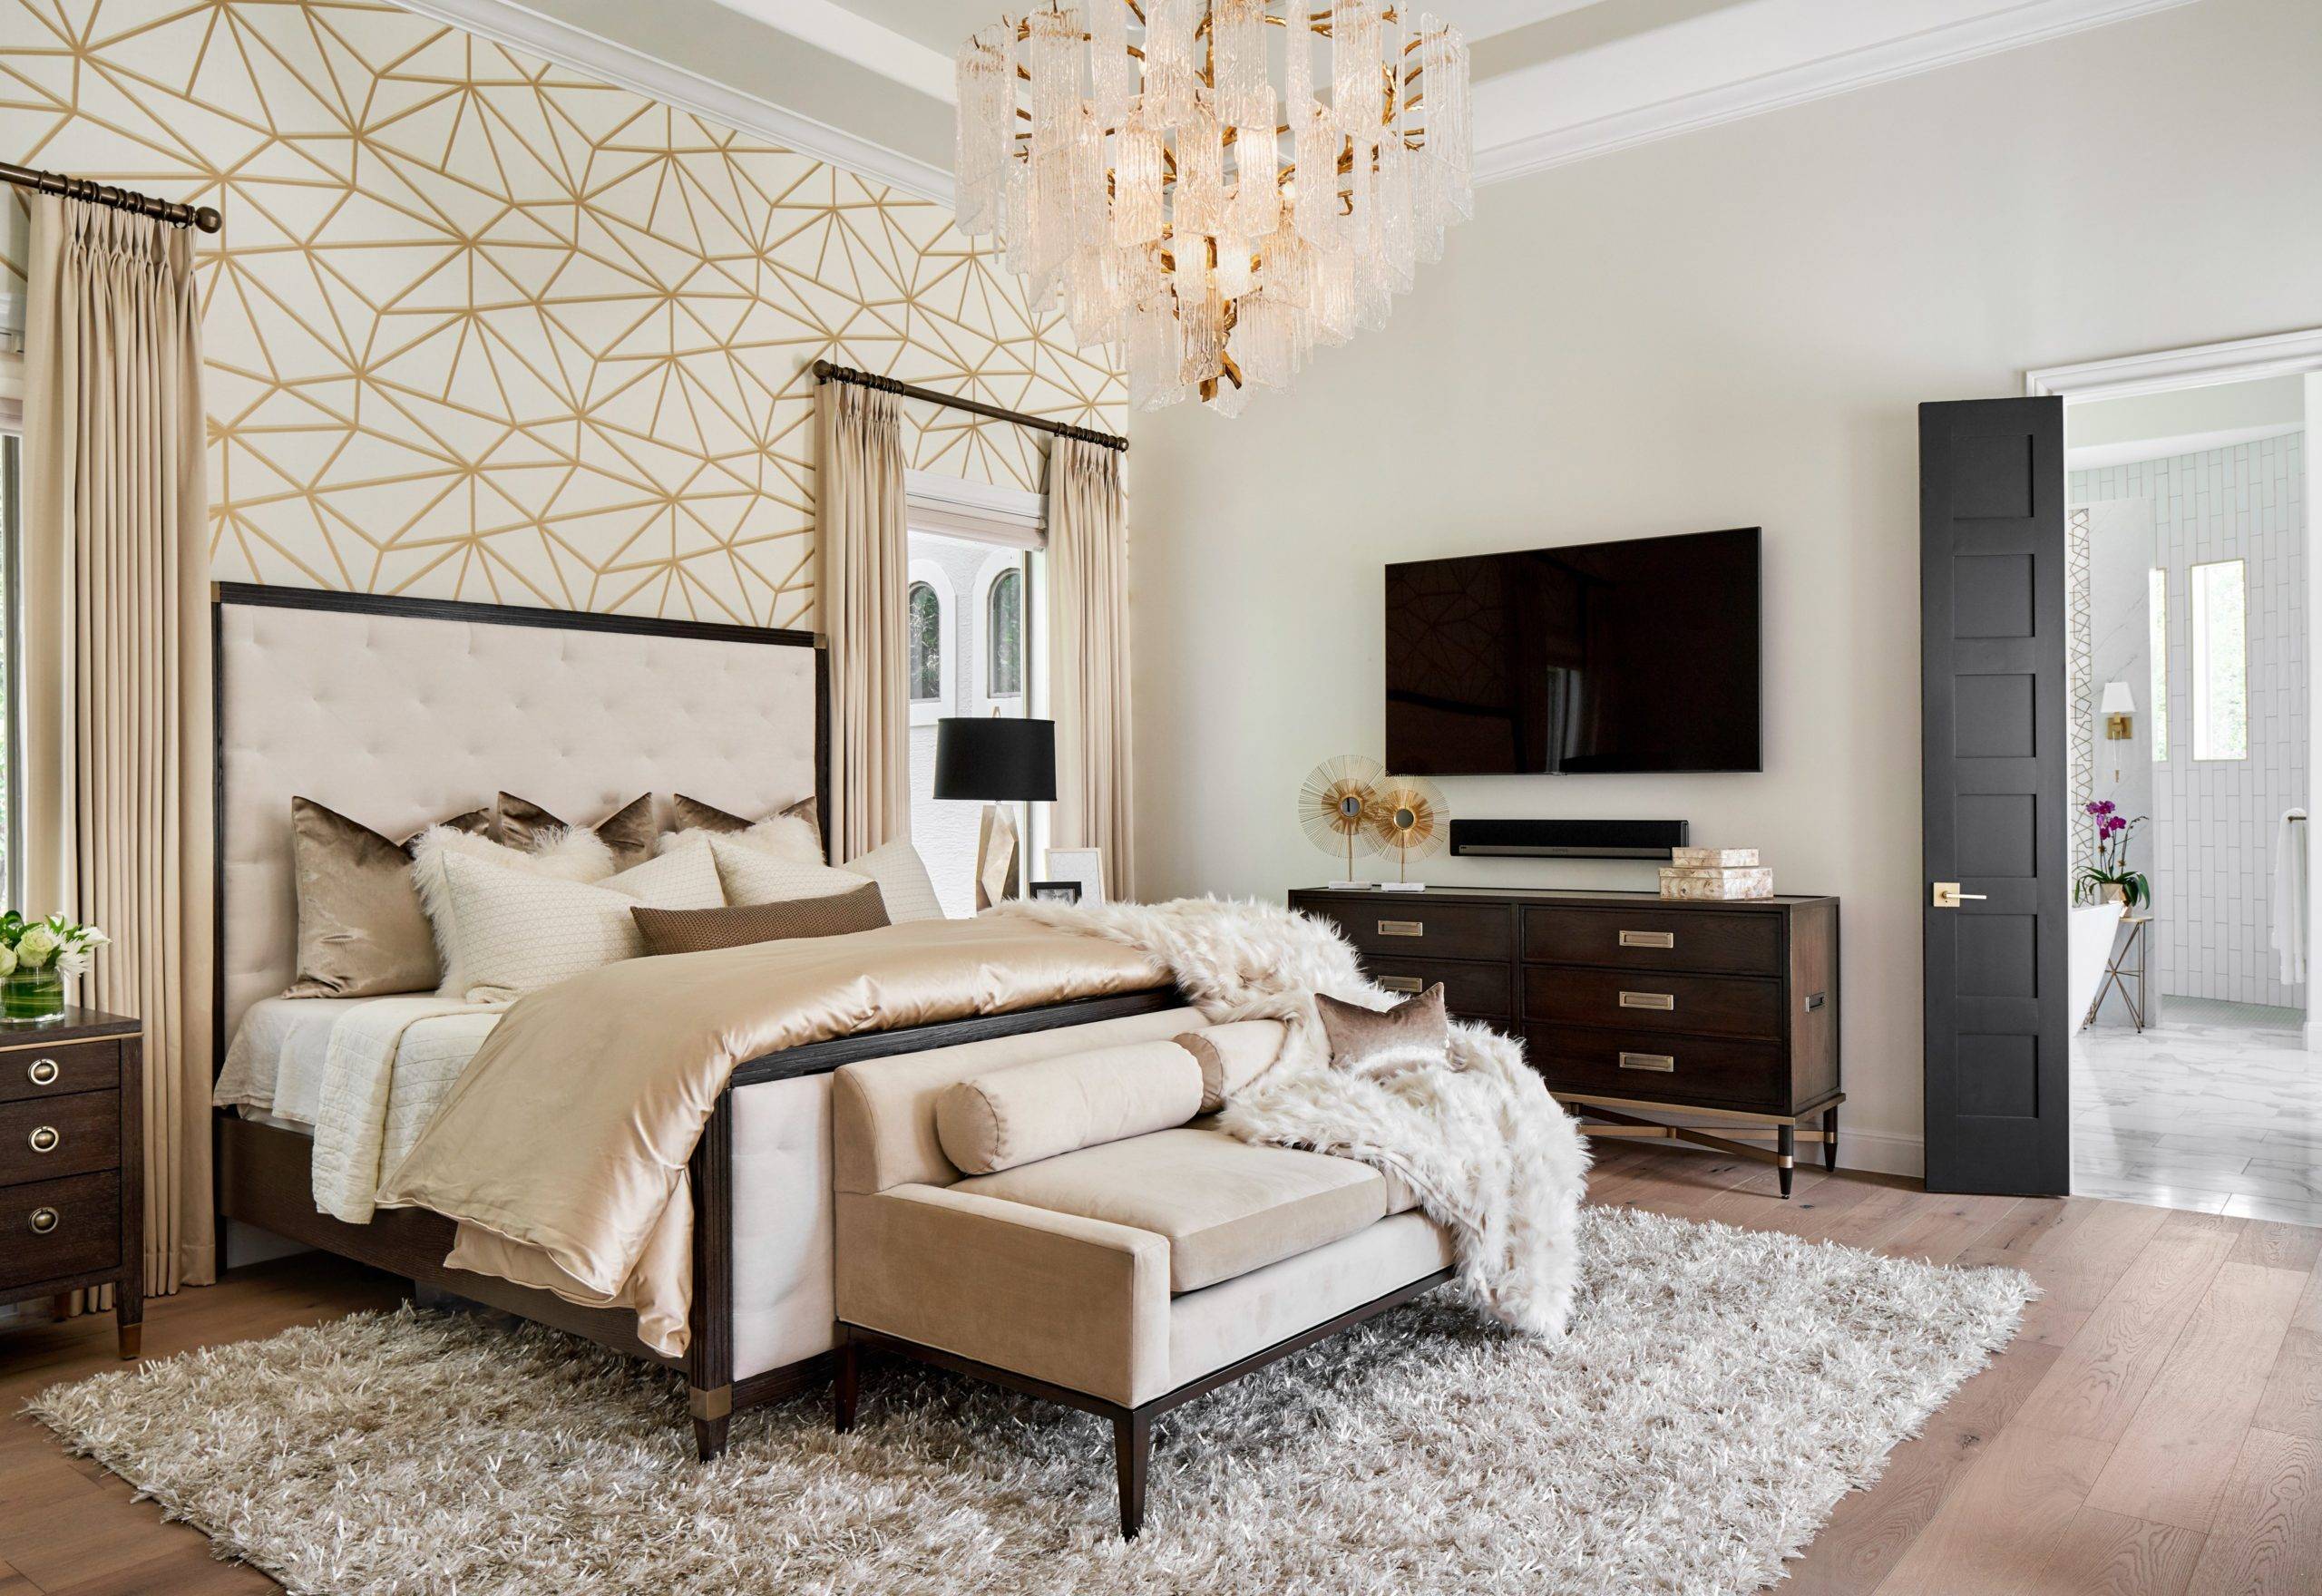 Wallpaper Accent Walls For a Serene Atmosphere in the Bedroom